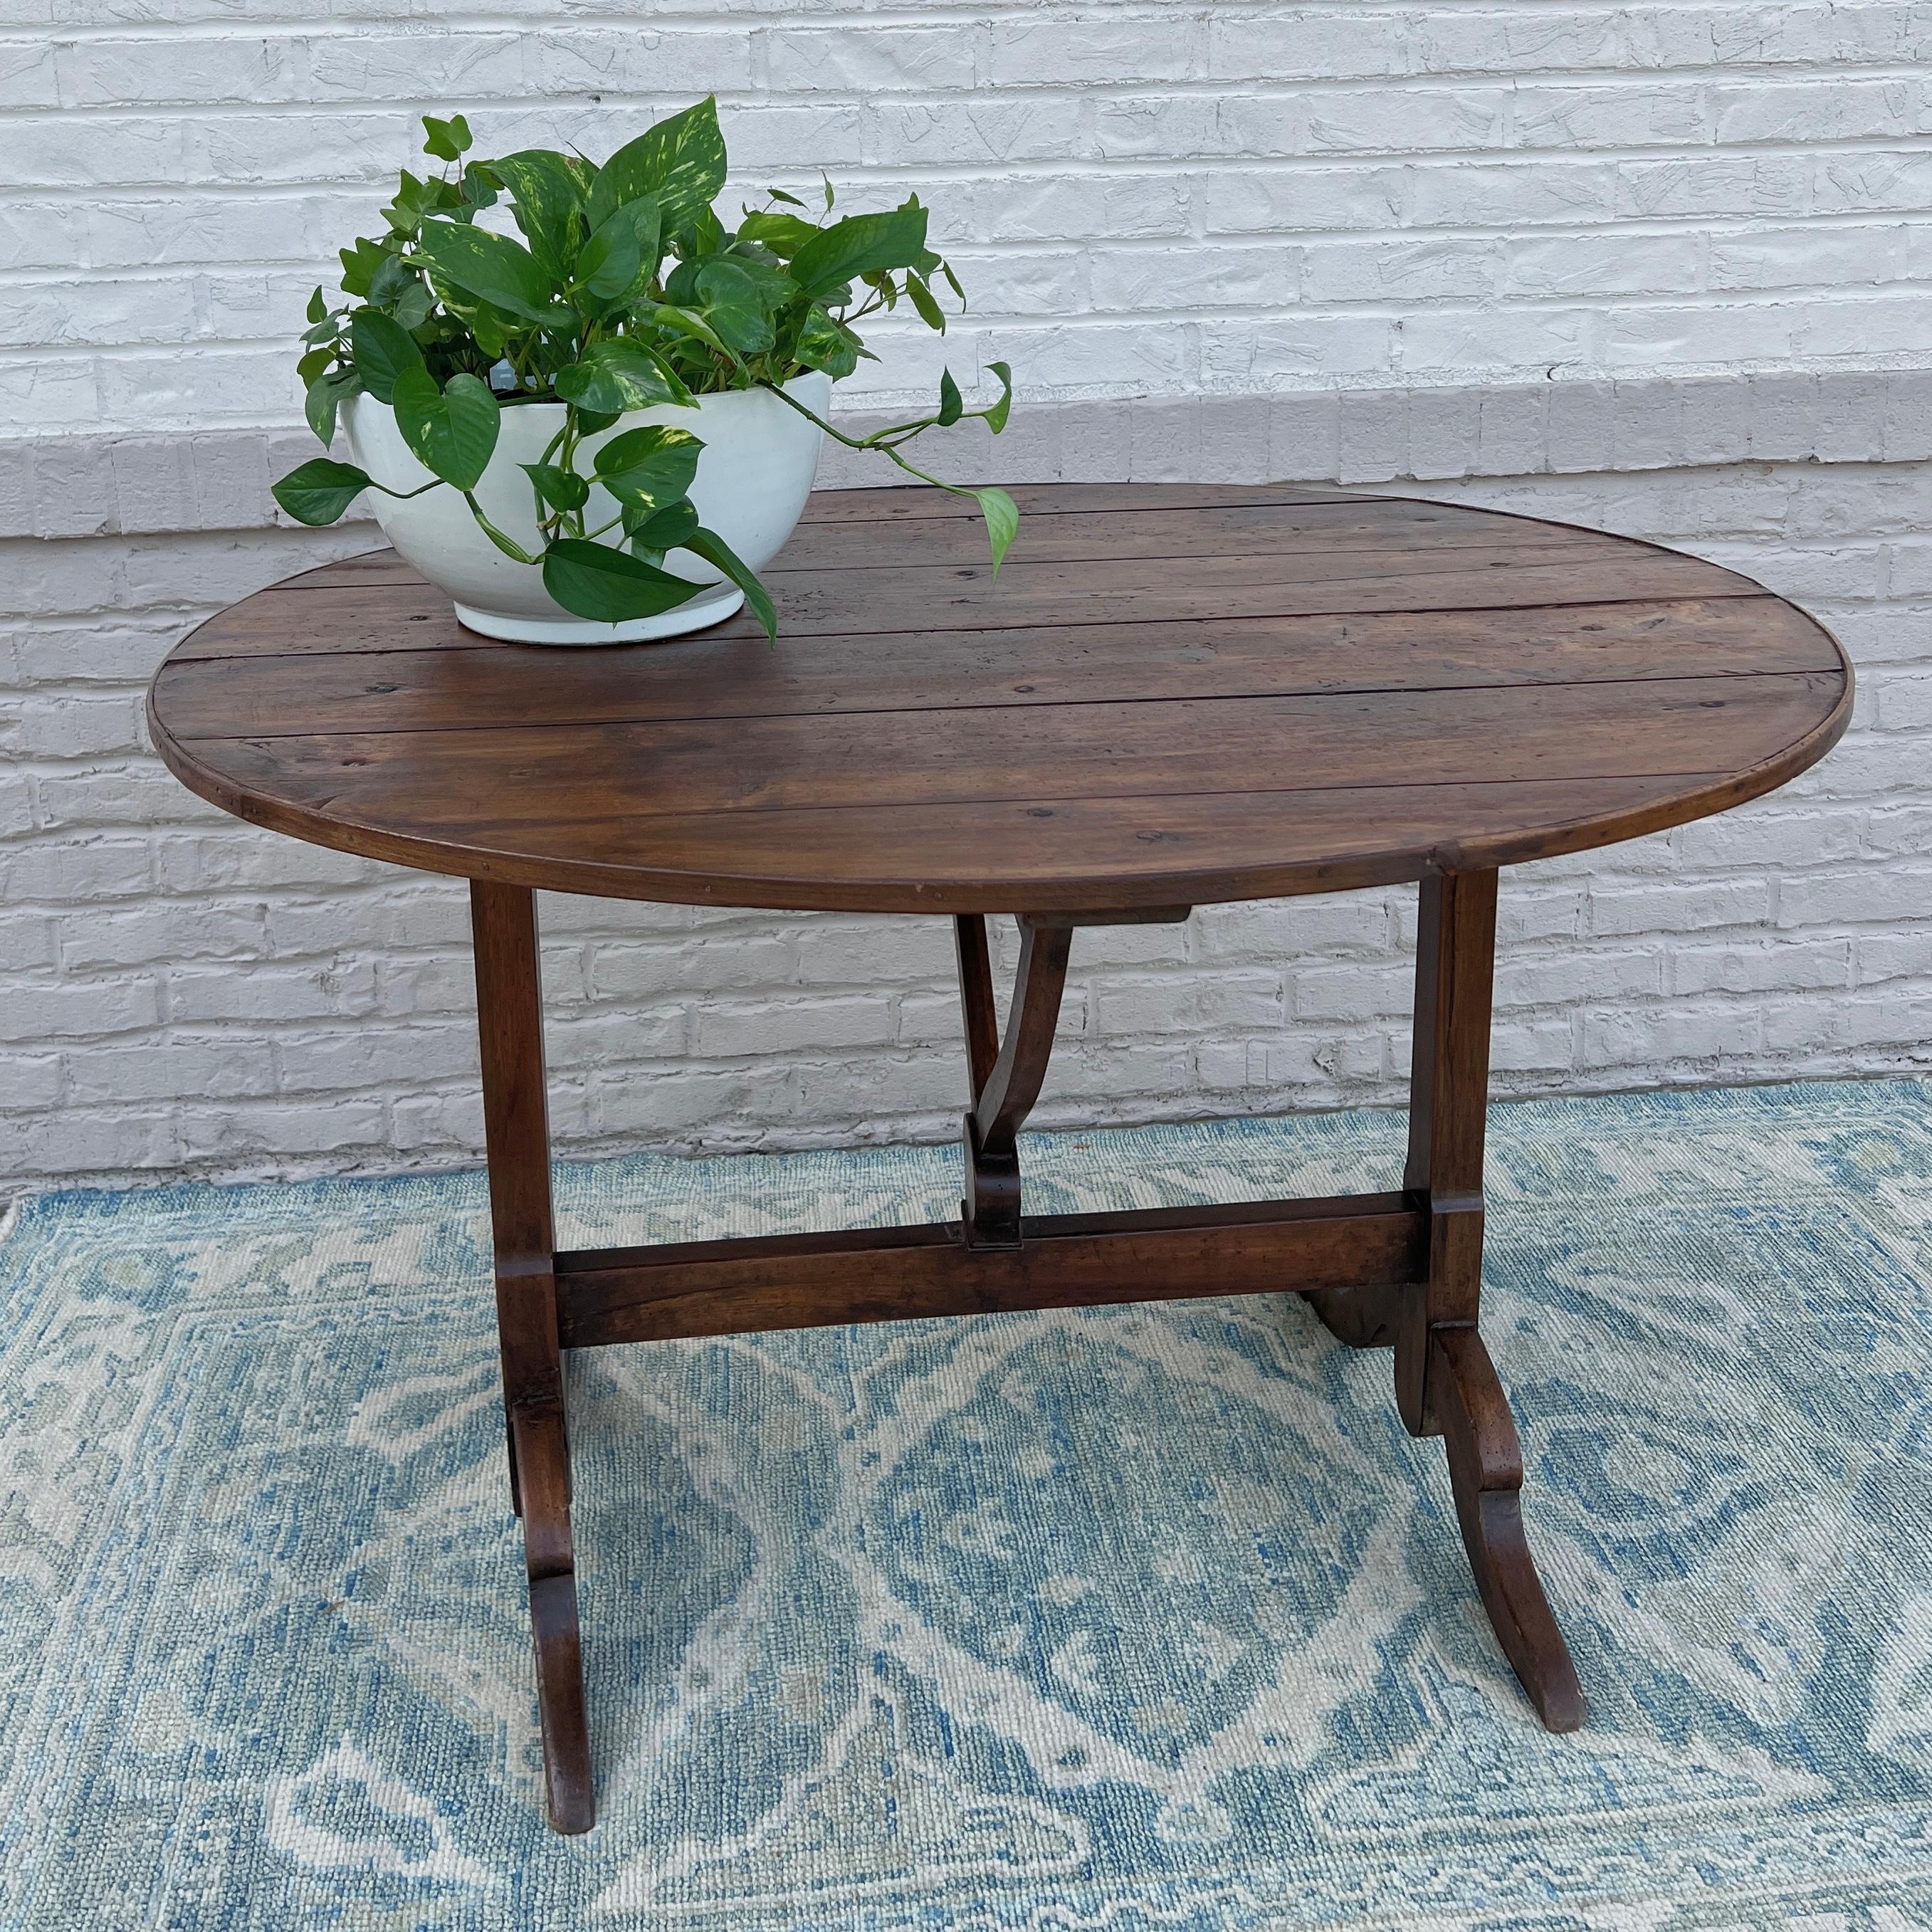 circa 19th century France. 

Beautiful oak wine tasting table that was once used in the vineyards of France for tasting wine or enjoying a meal. Featuring a tilt top with a banded edge and a truly gorgeous patina that has been restored with a